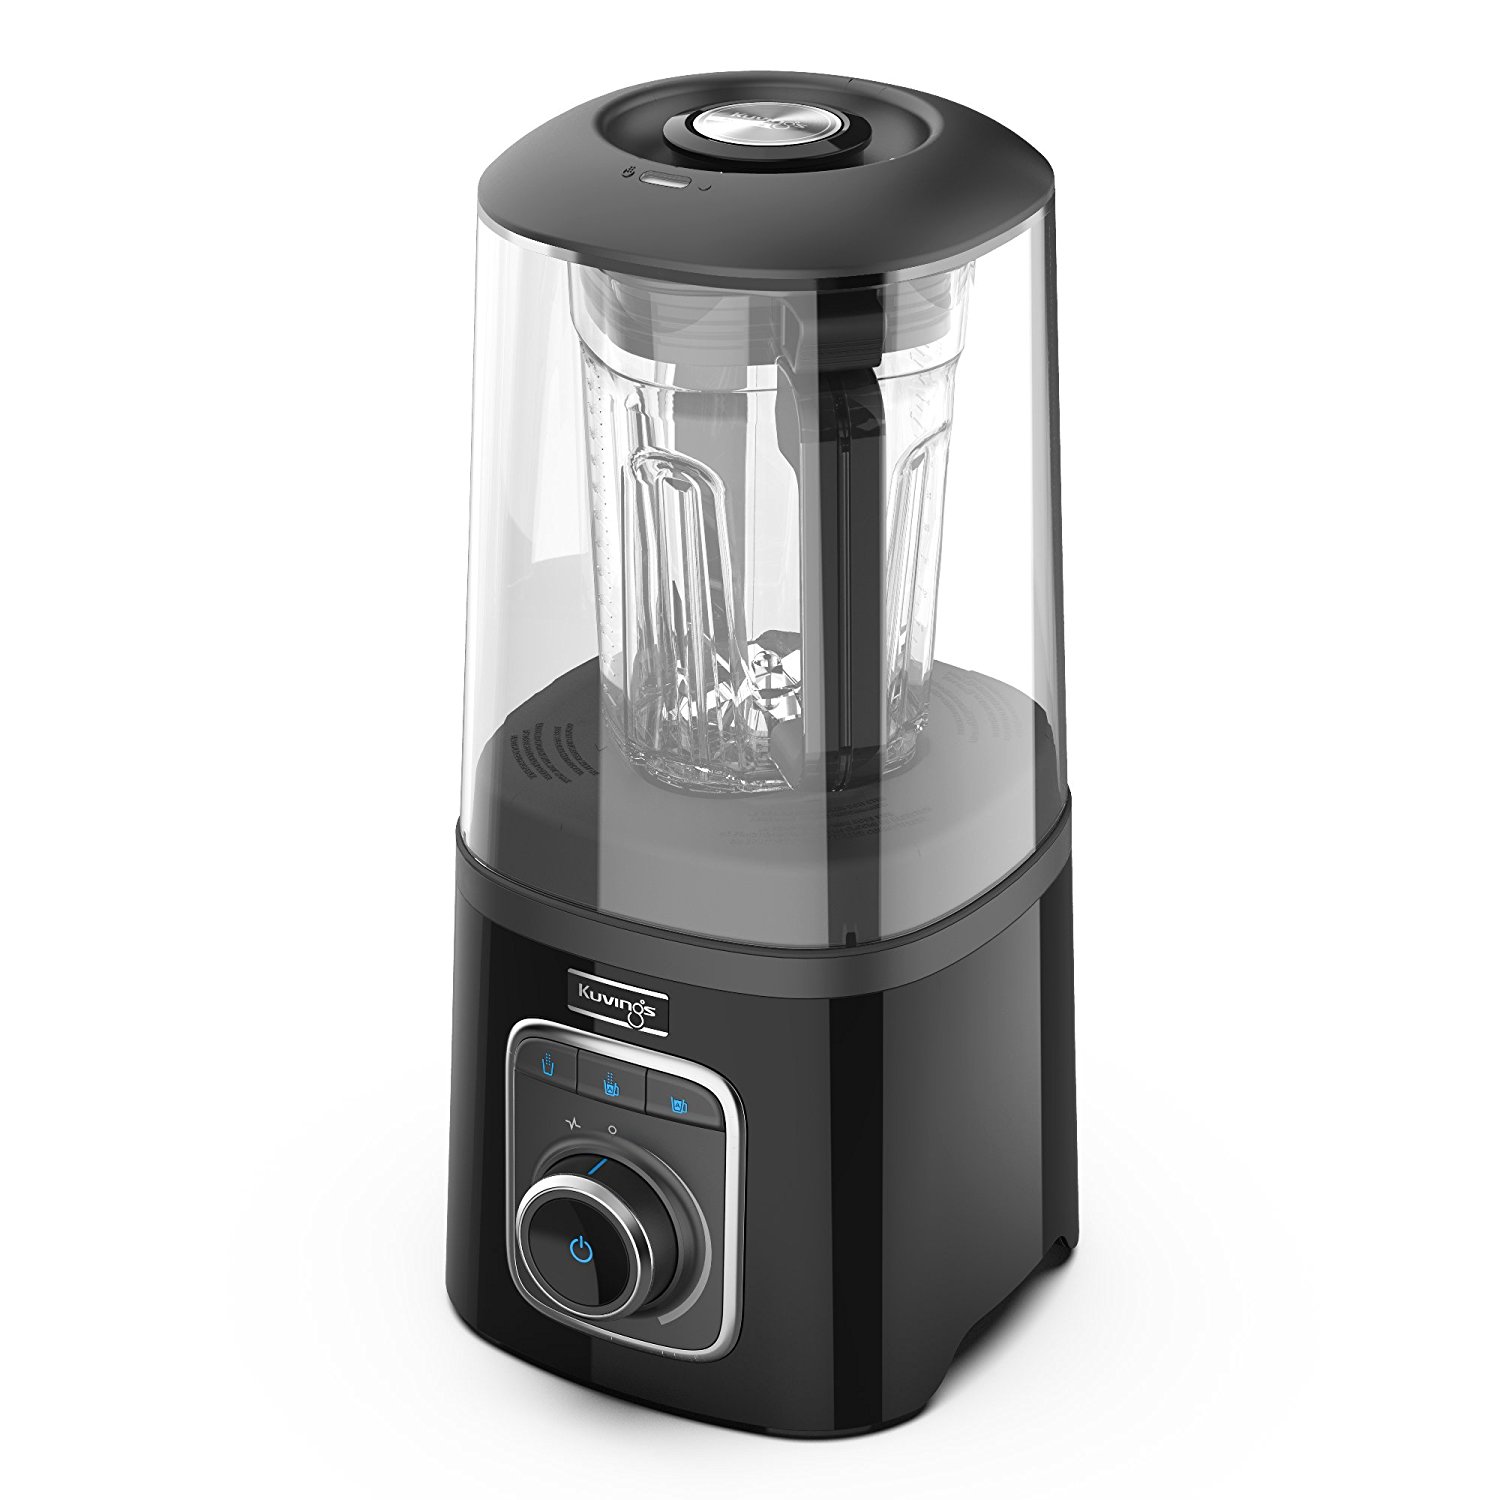 Kuvings Vacuum Sealed Auto Blender SV500B with BPA-Free Components, Quiet Blender, Virtually No Foam, Heavy Duty 3.5 HP Motor, 7 Year Warranty, Black